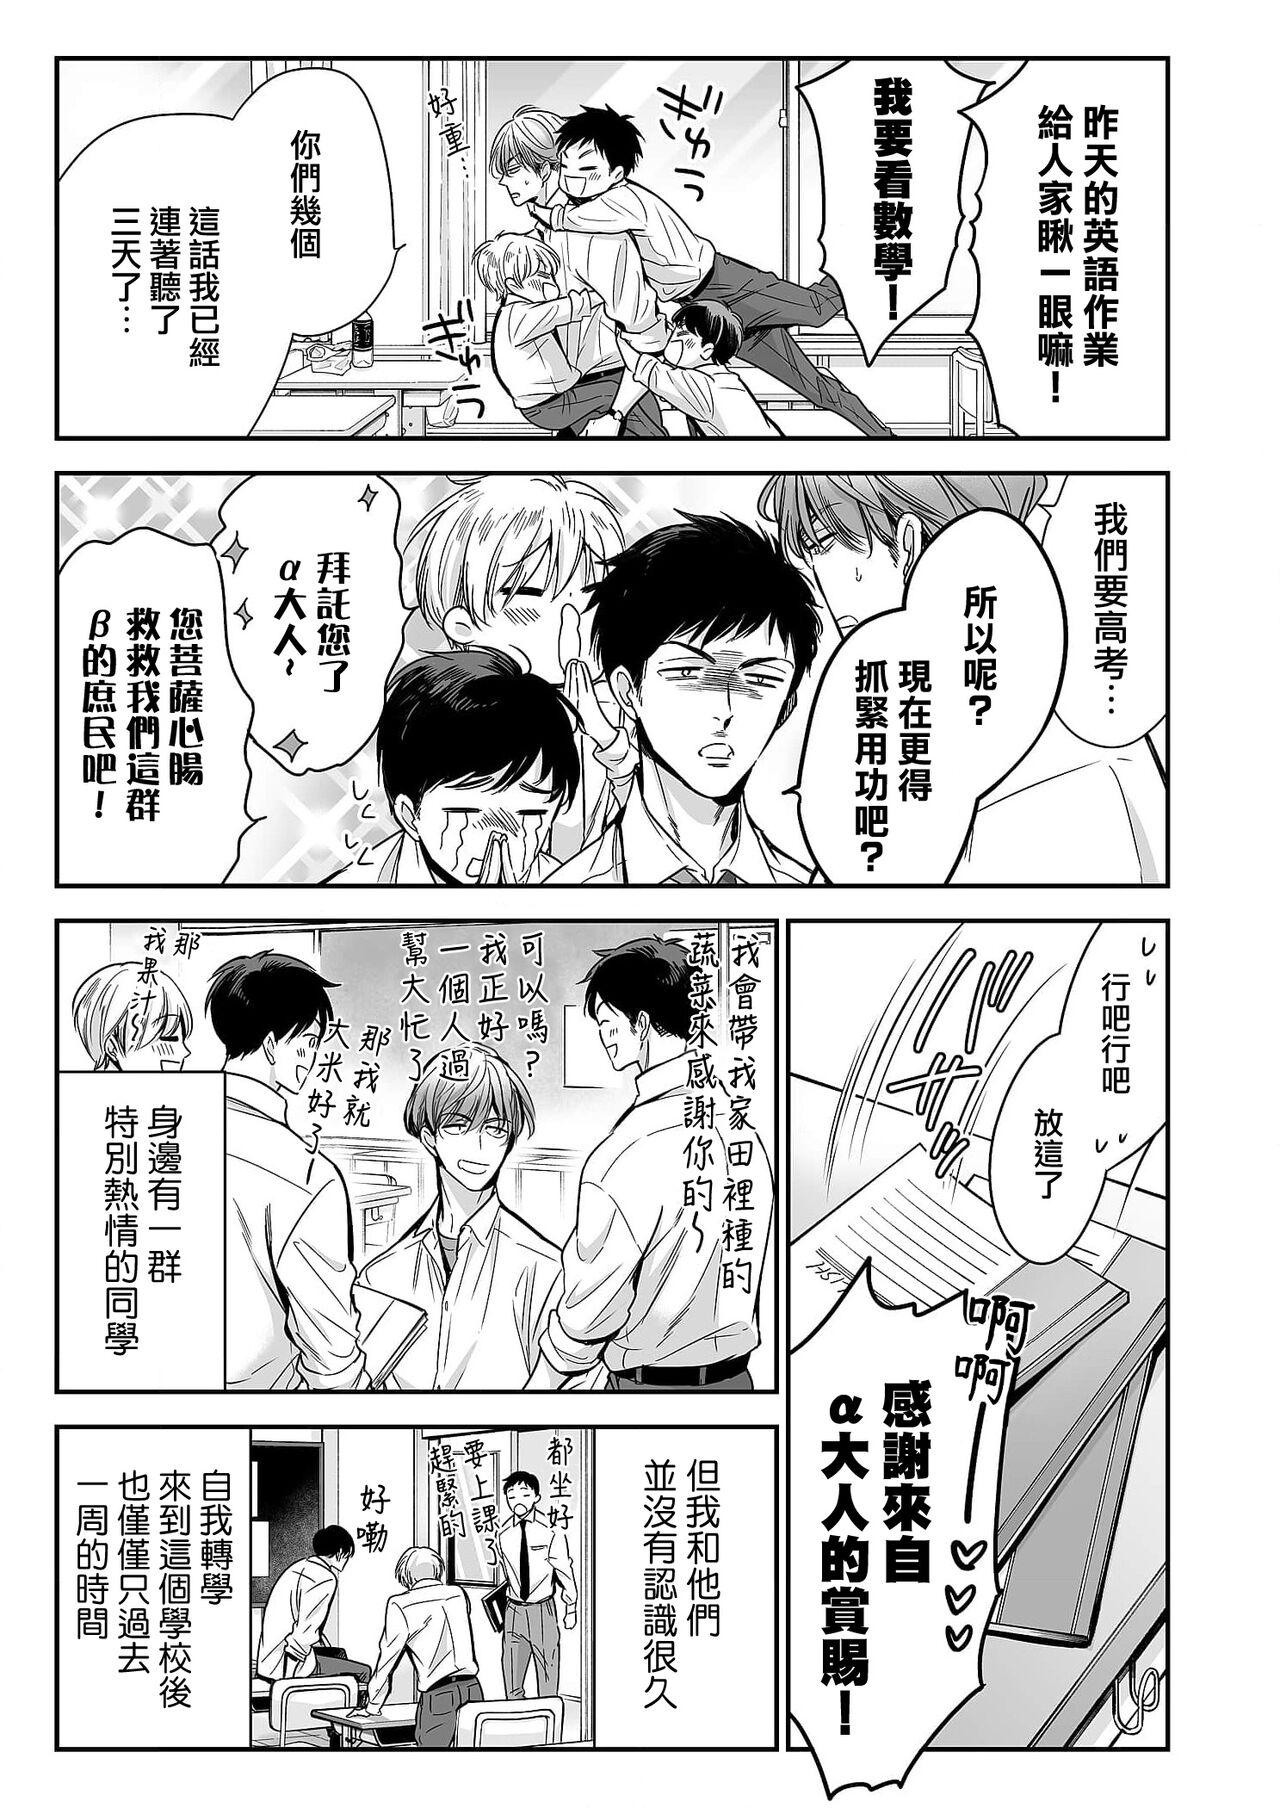 Lovers anta wa ore no omegadaro | 你是我的Omega吧 1-6 Teenage Sex - Page 10